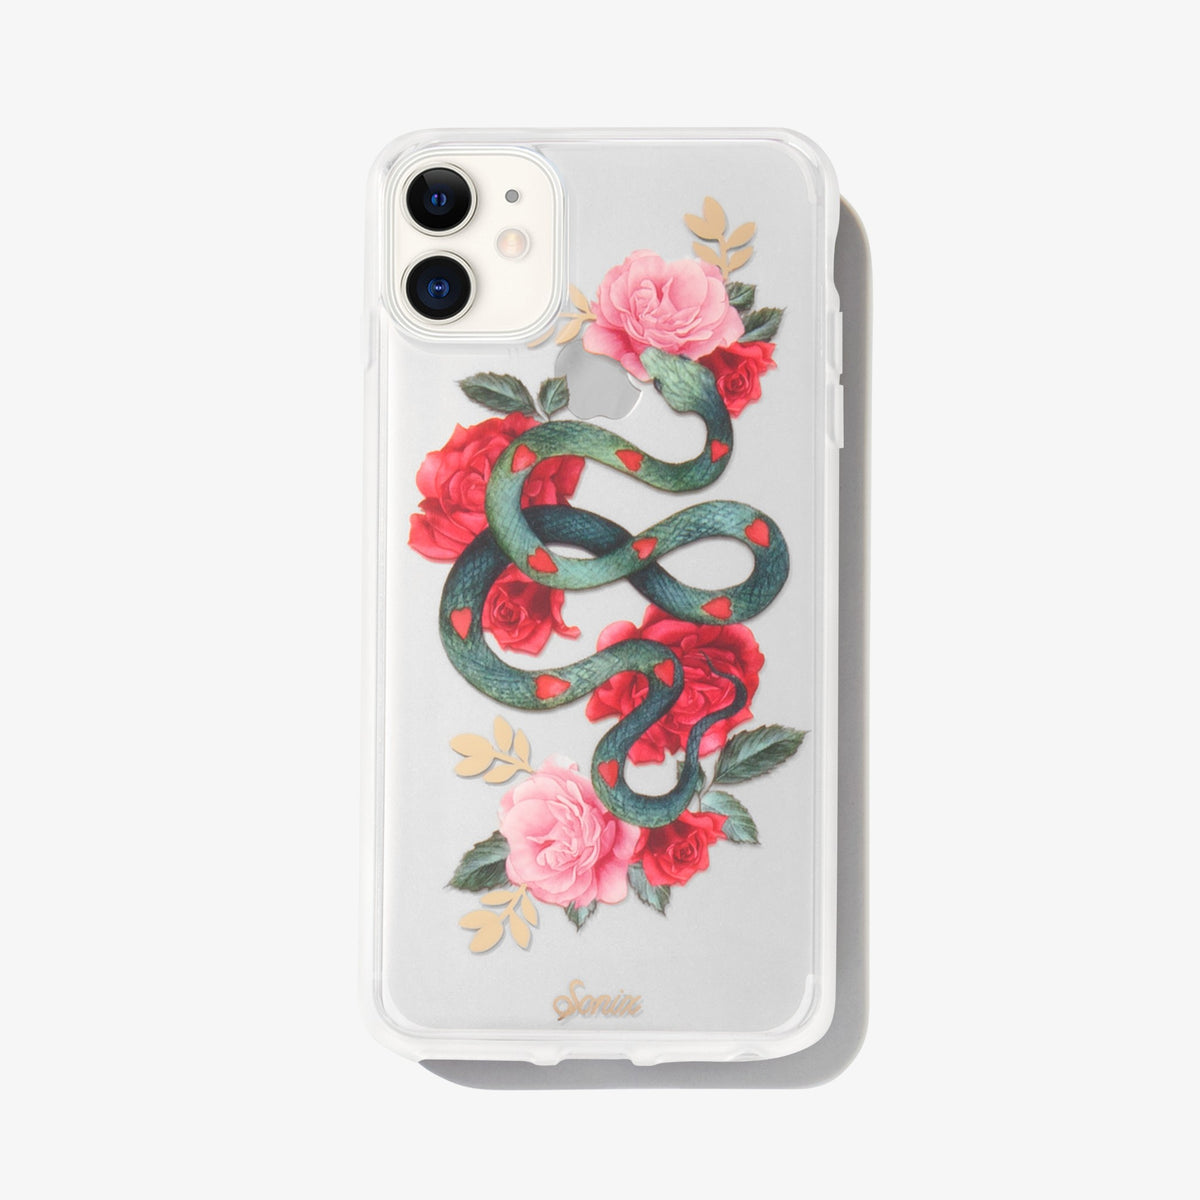 GUCCI SNAKE LEATHER iPhone 7 / 8 Plus Case Cover